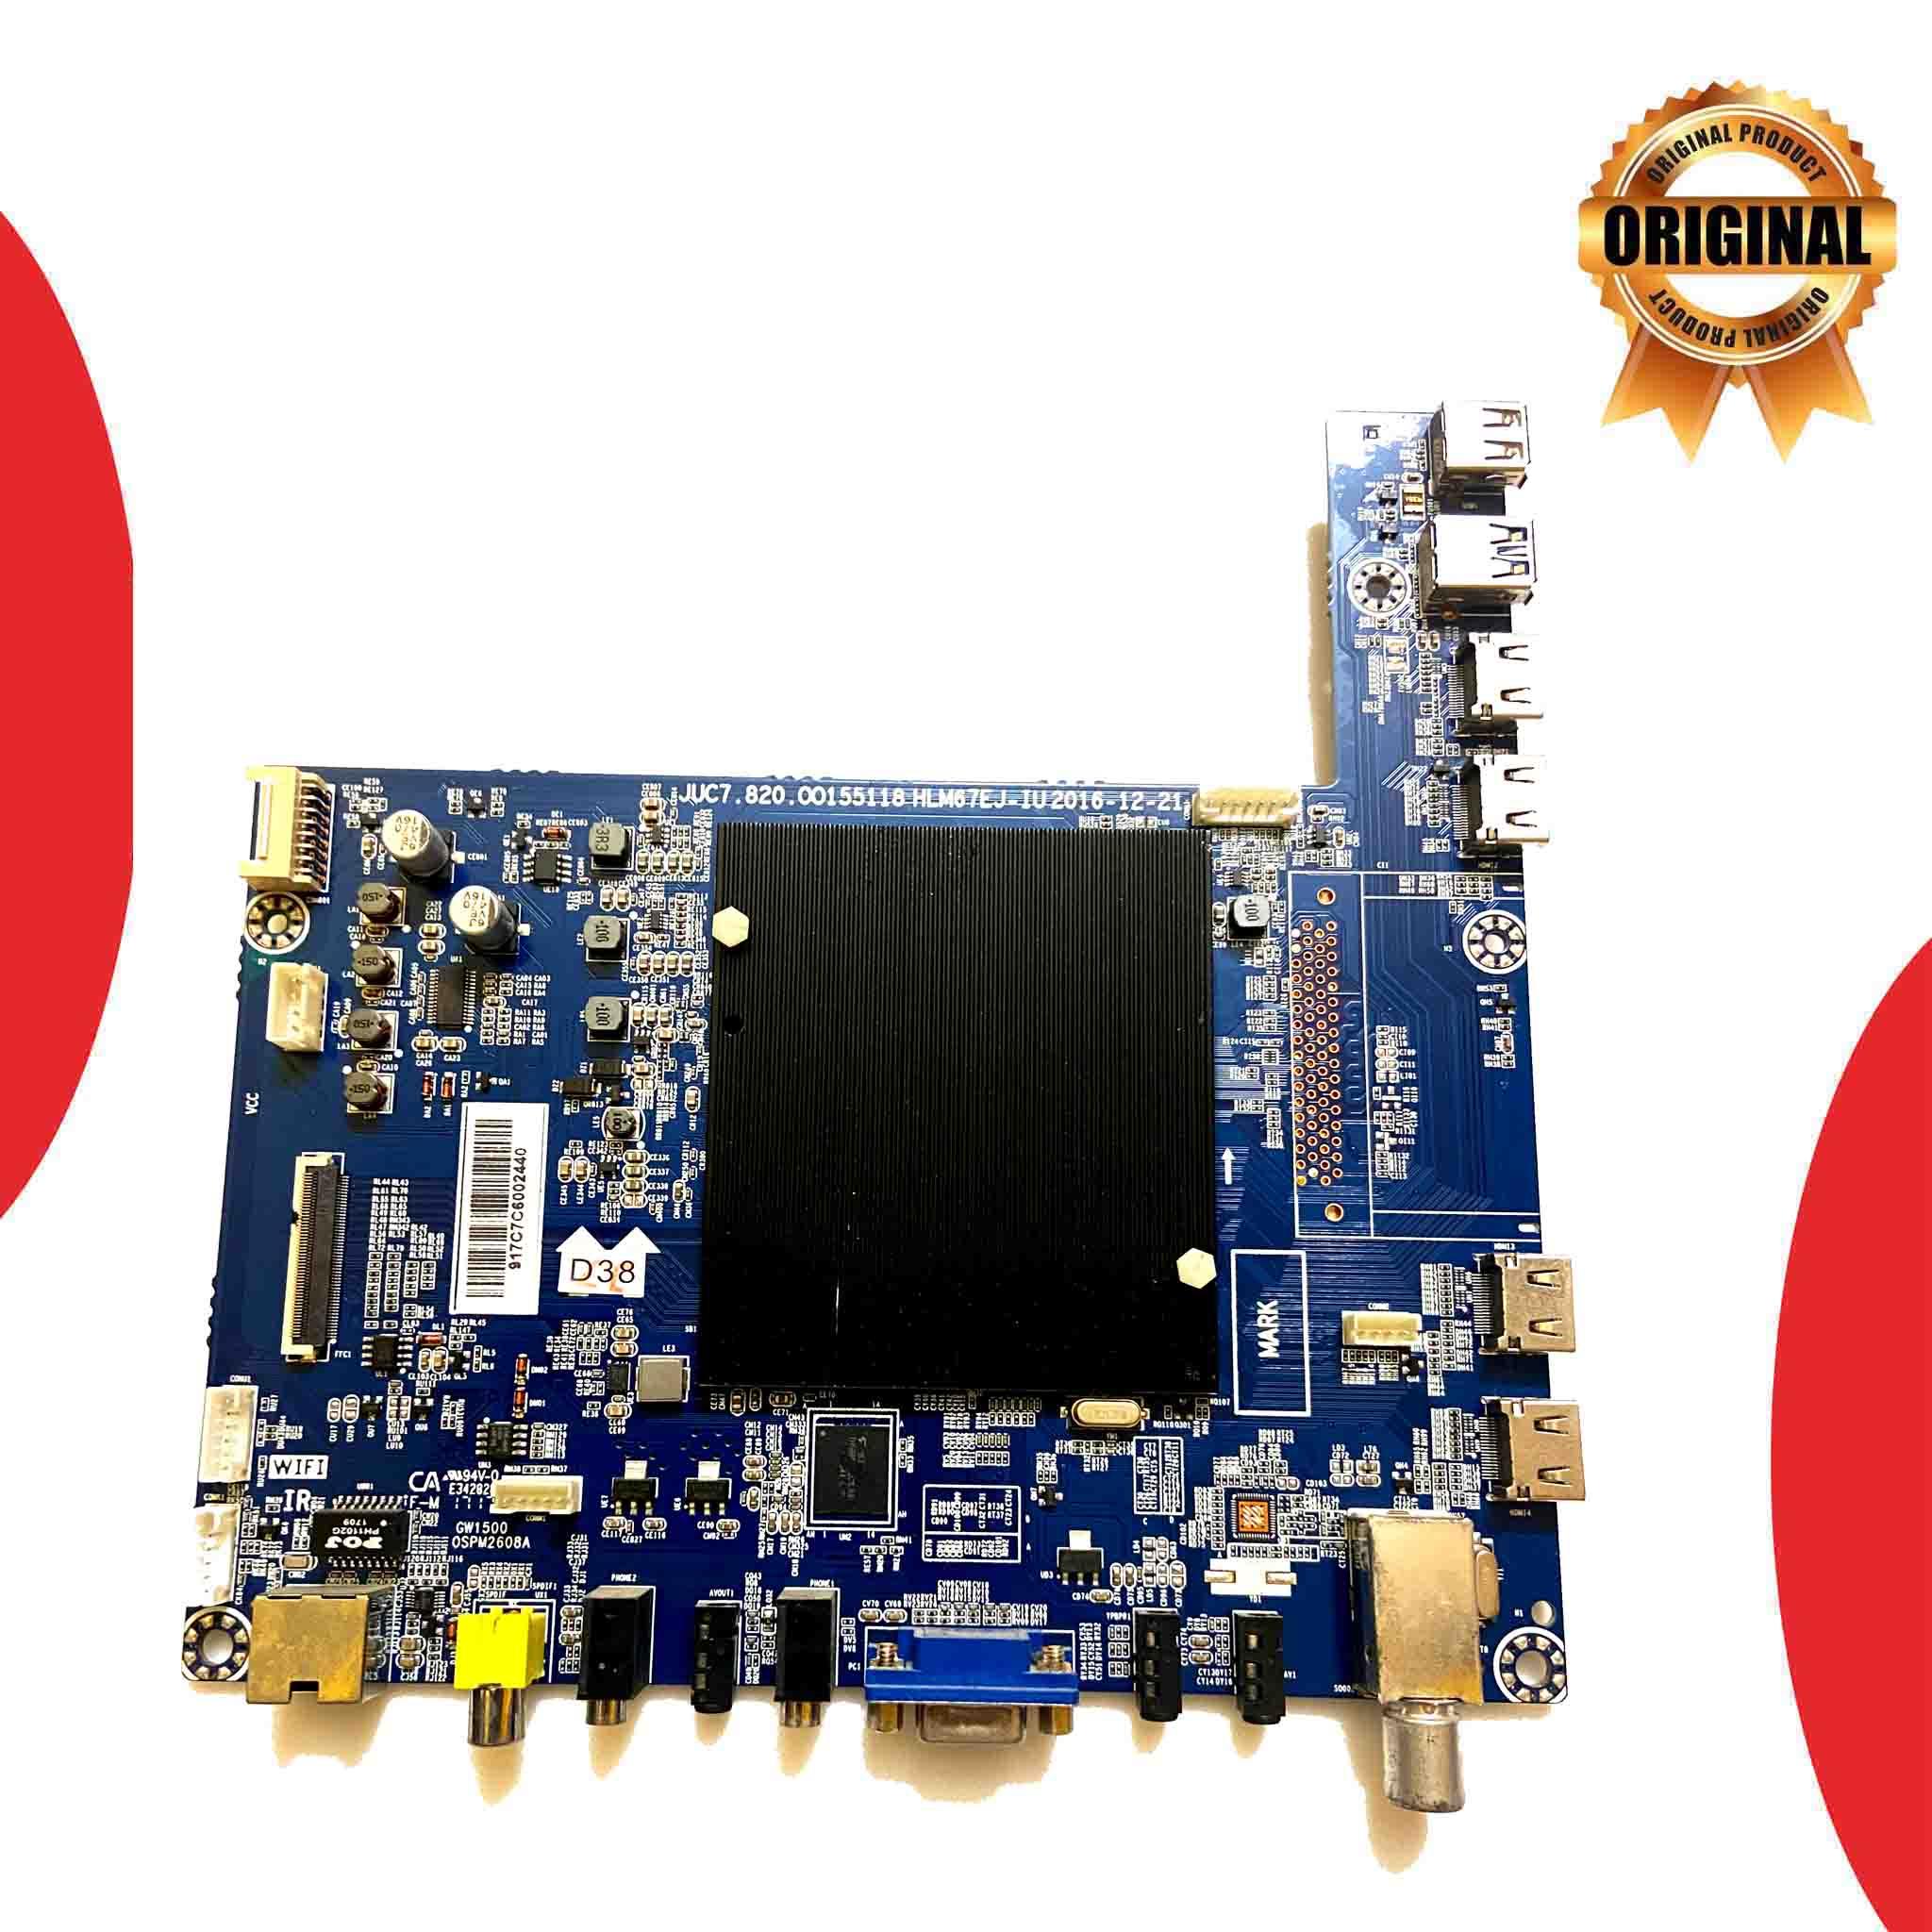 Model RELEE5502 Reconnect LED TV Motherboard - Great Bharat Electronics